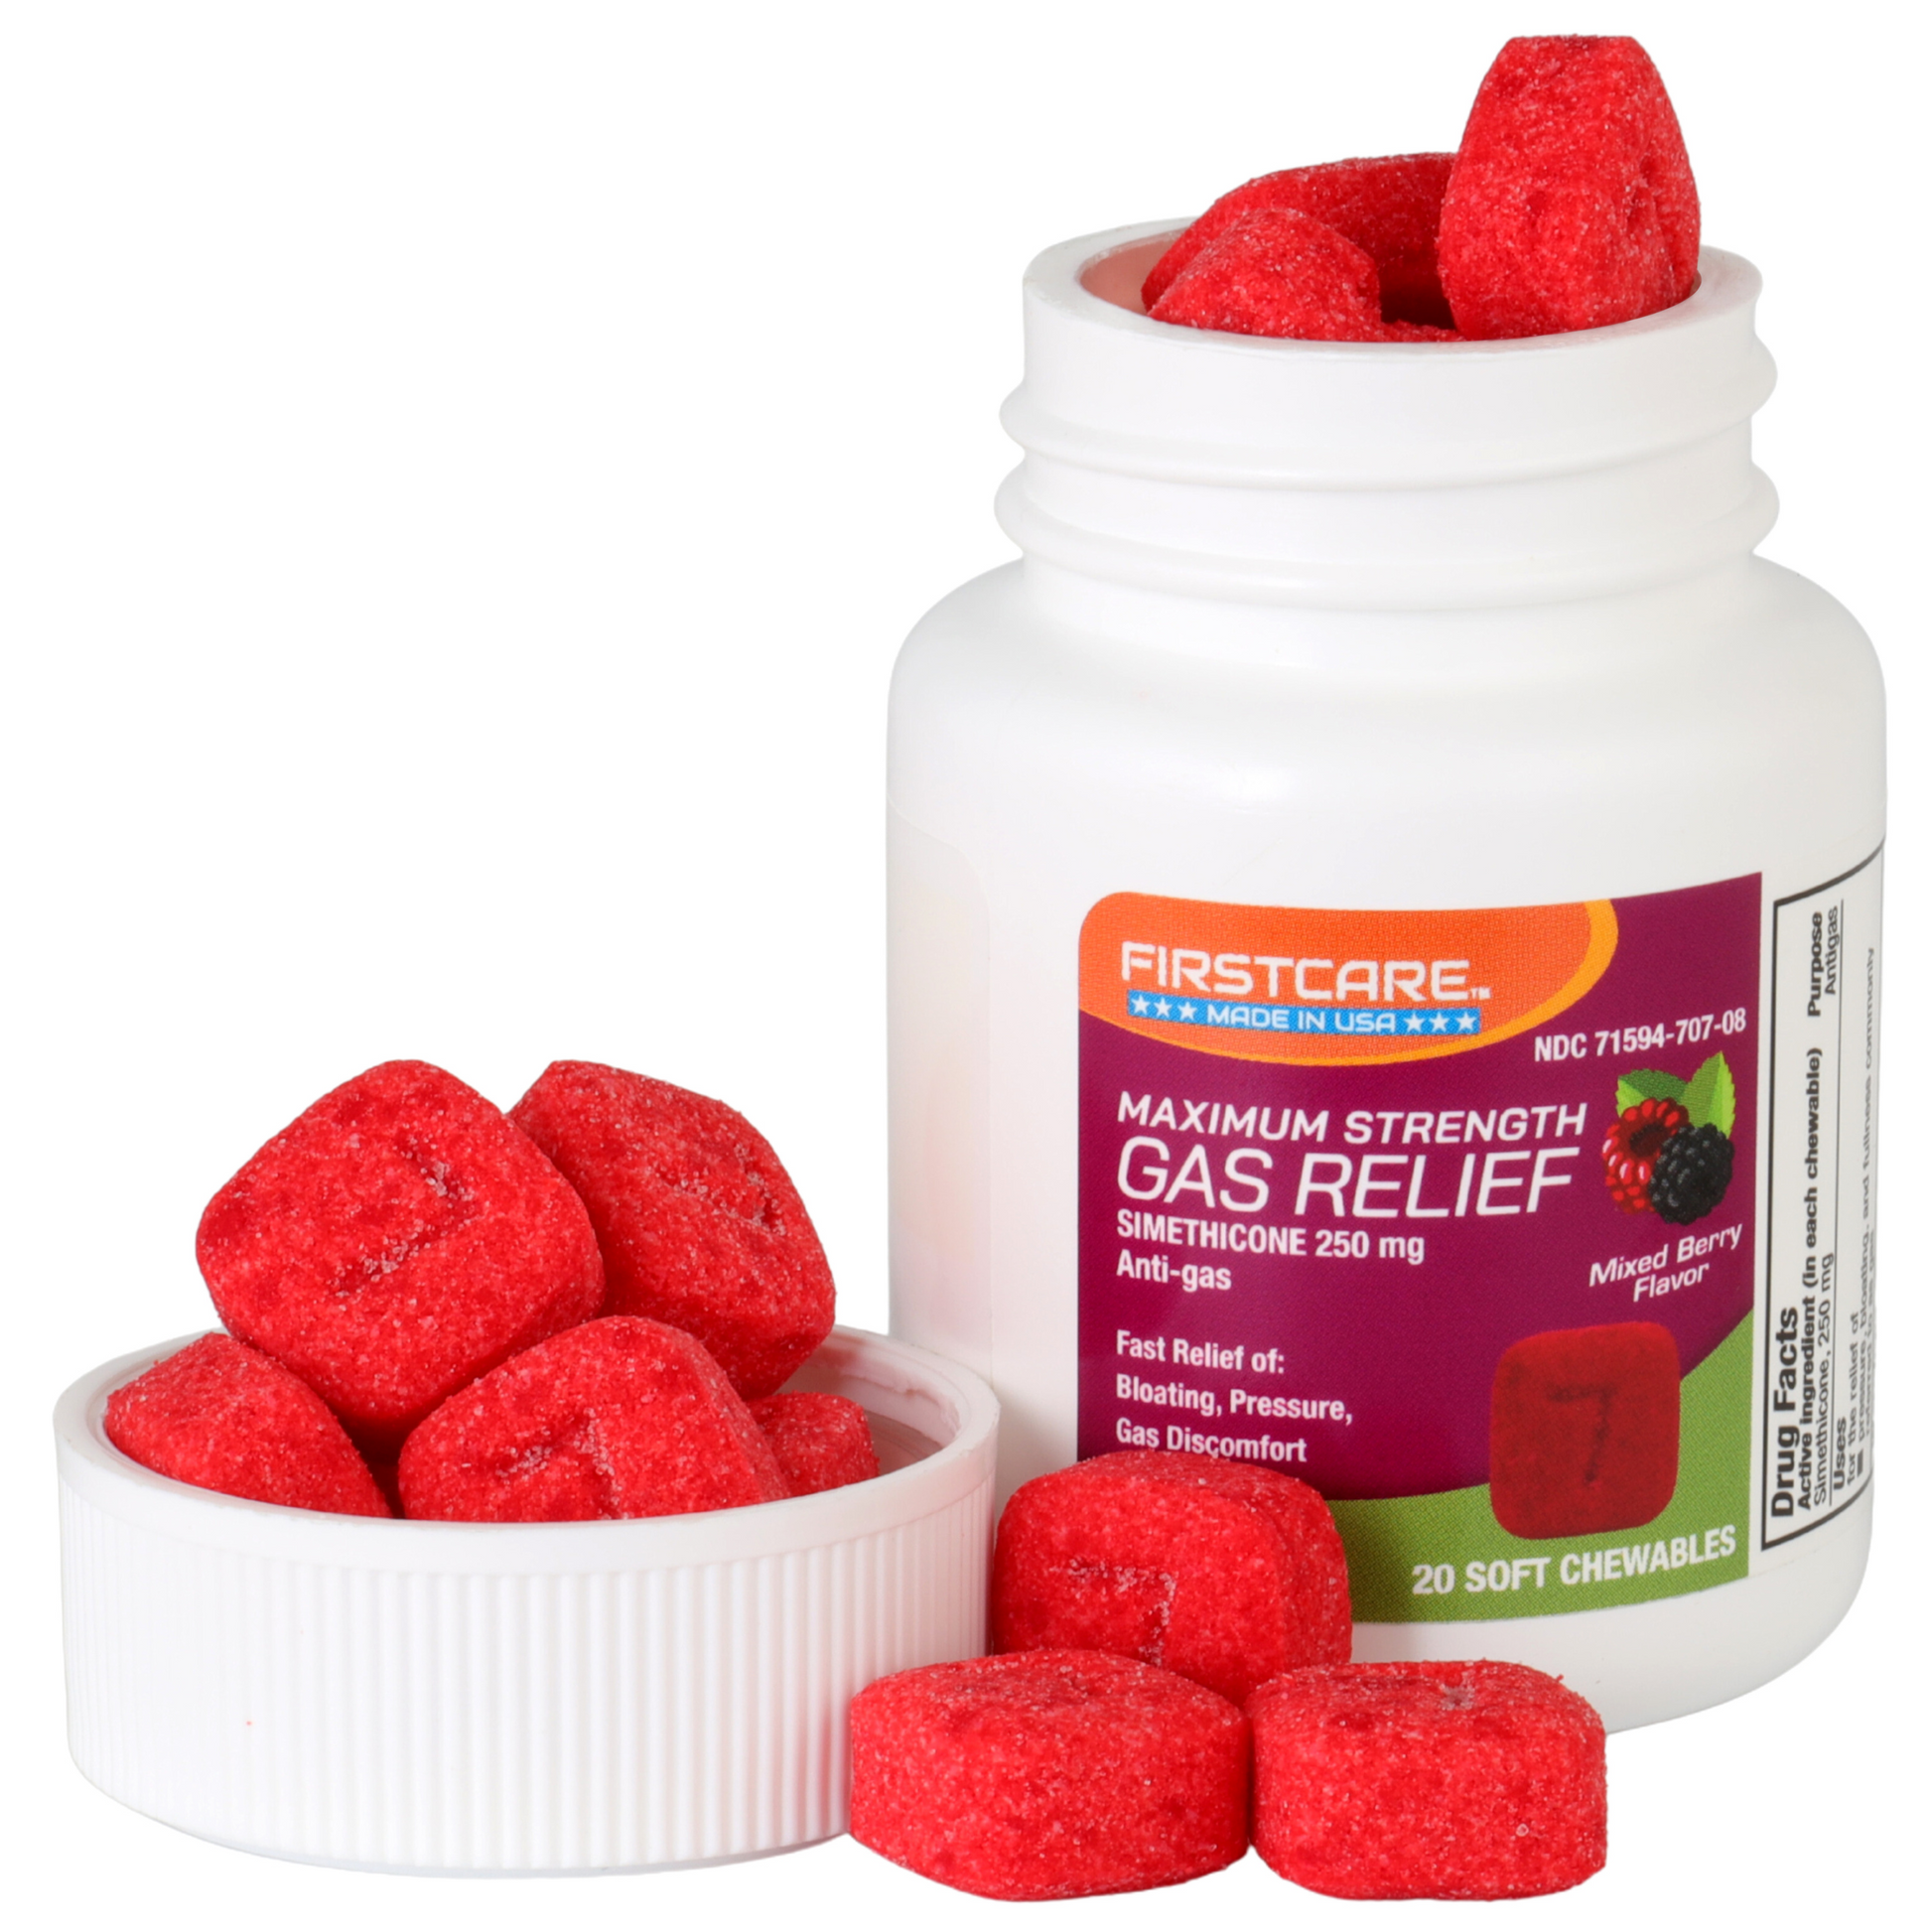 Easy to take as chewables with a pleasant taste.  Very helpful in relieving the gas pains